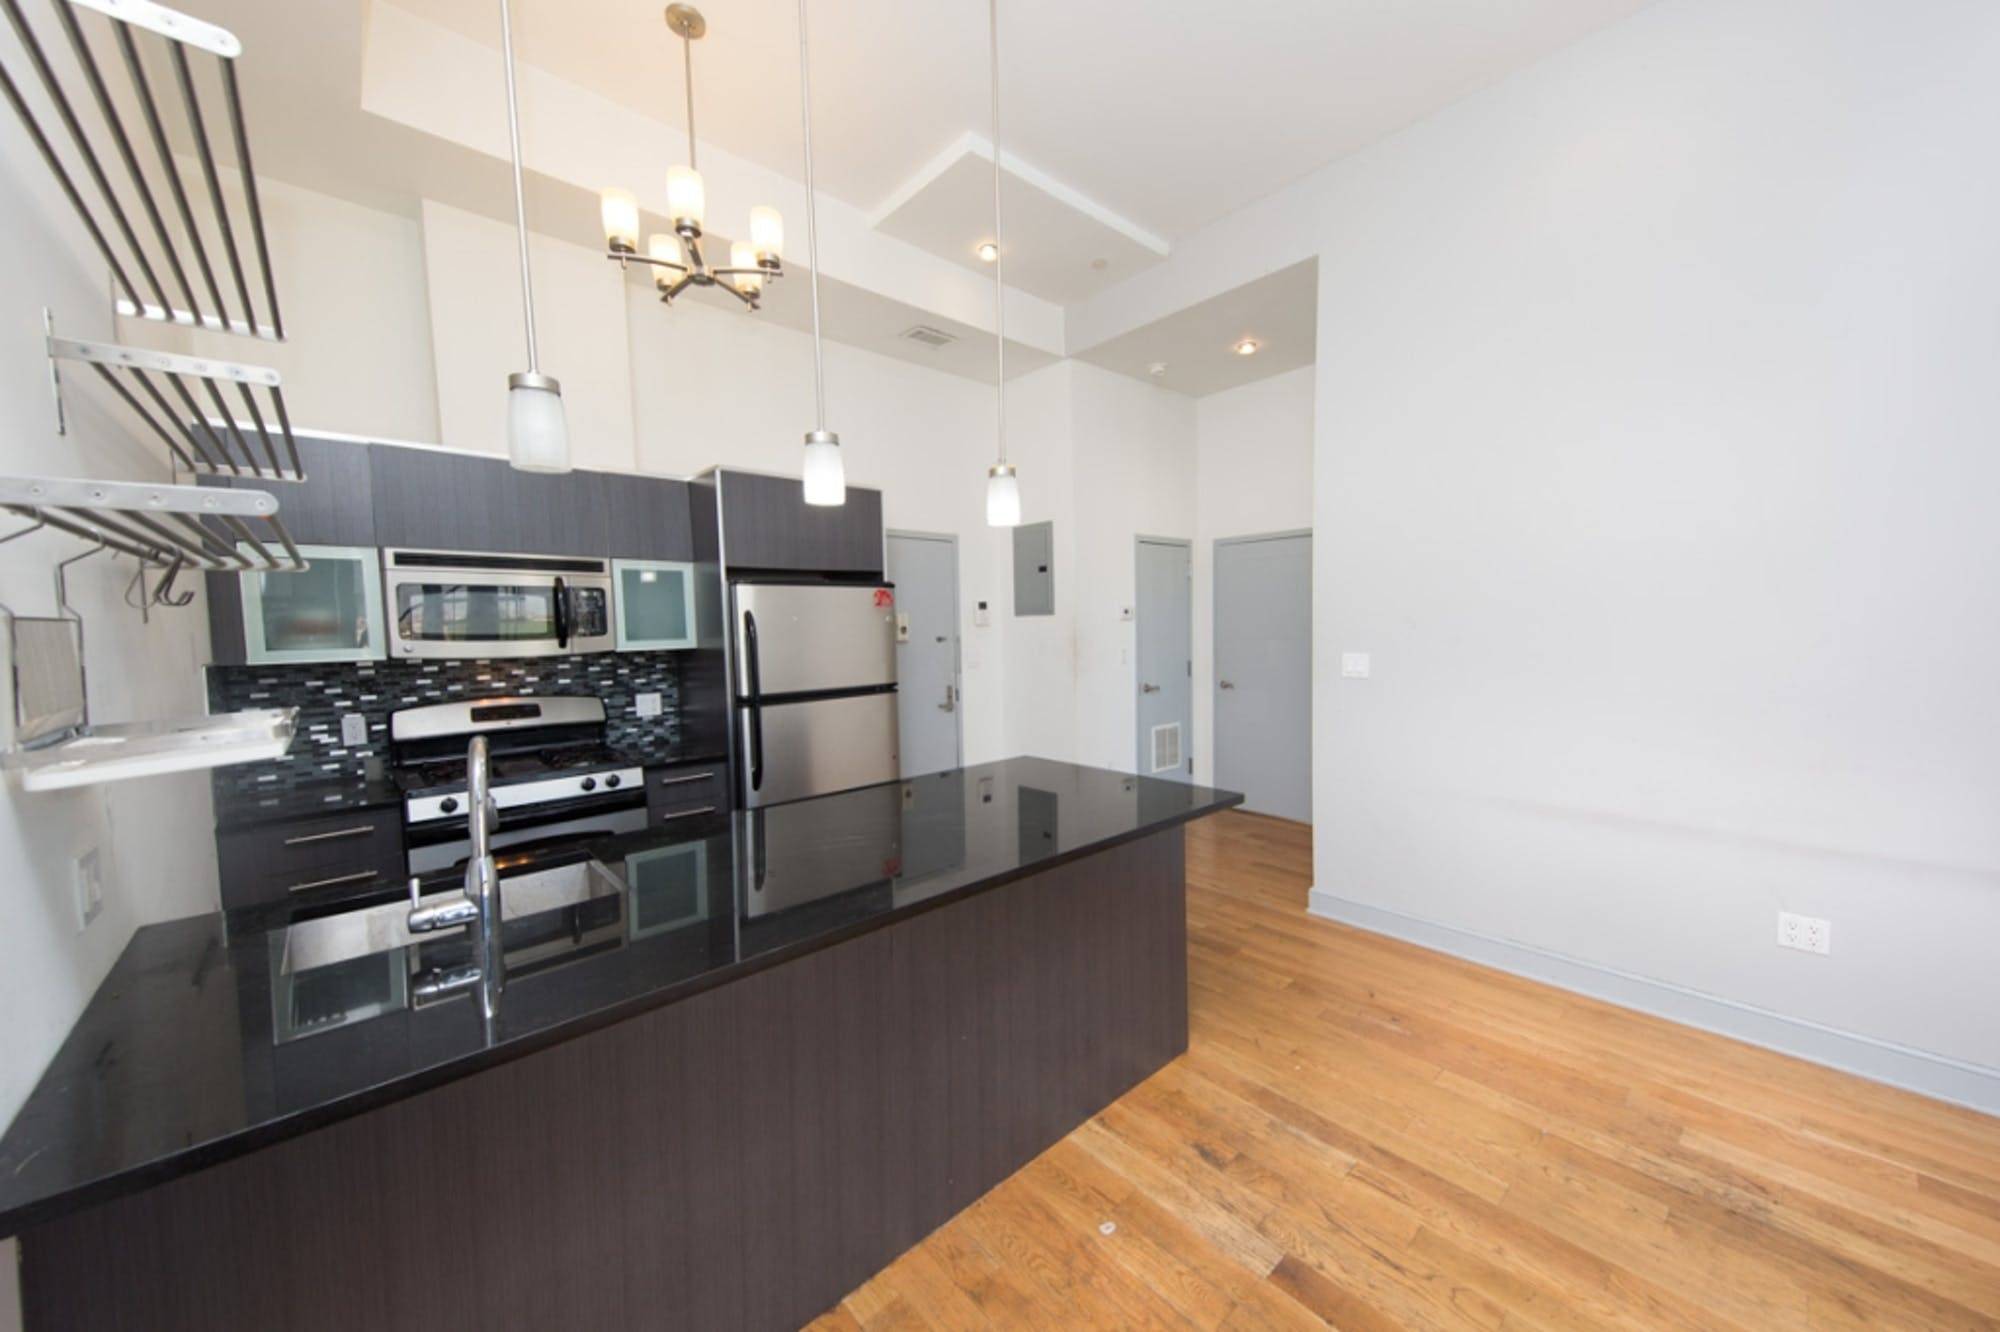 Welcome to 365 Union Avenue 365 Union Avenue is situated amongst many great conveniences.